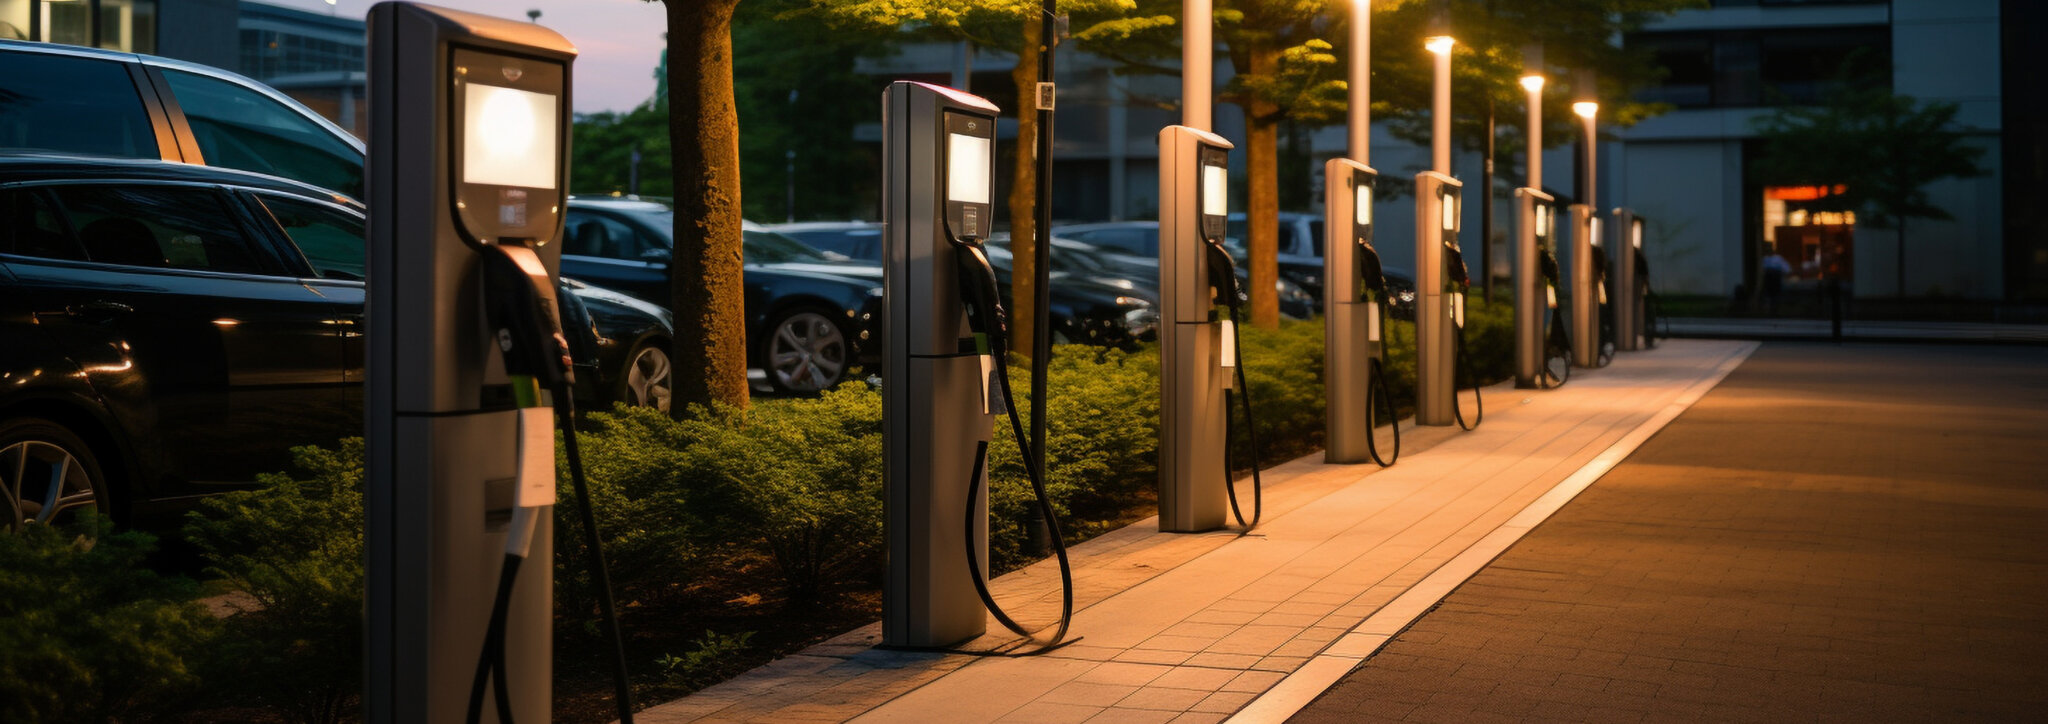 Electric Vehicle Charging Stations lined up at night.